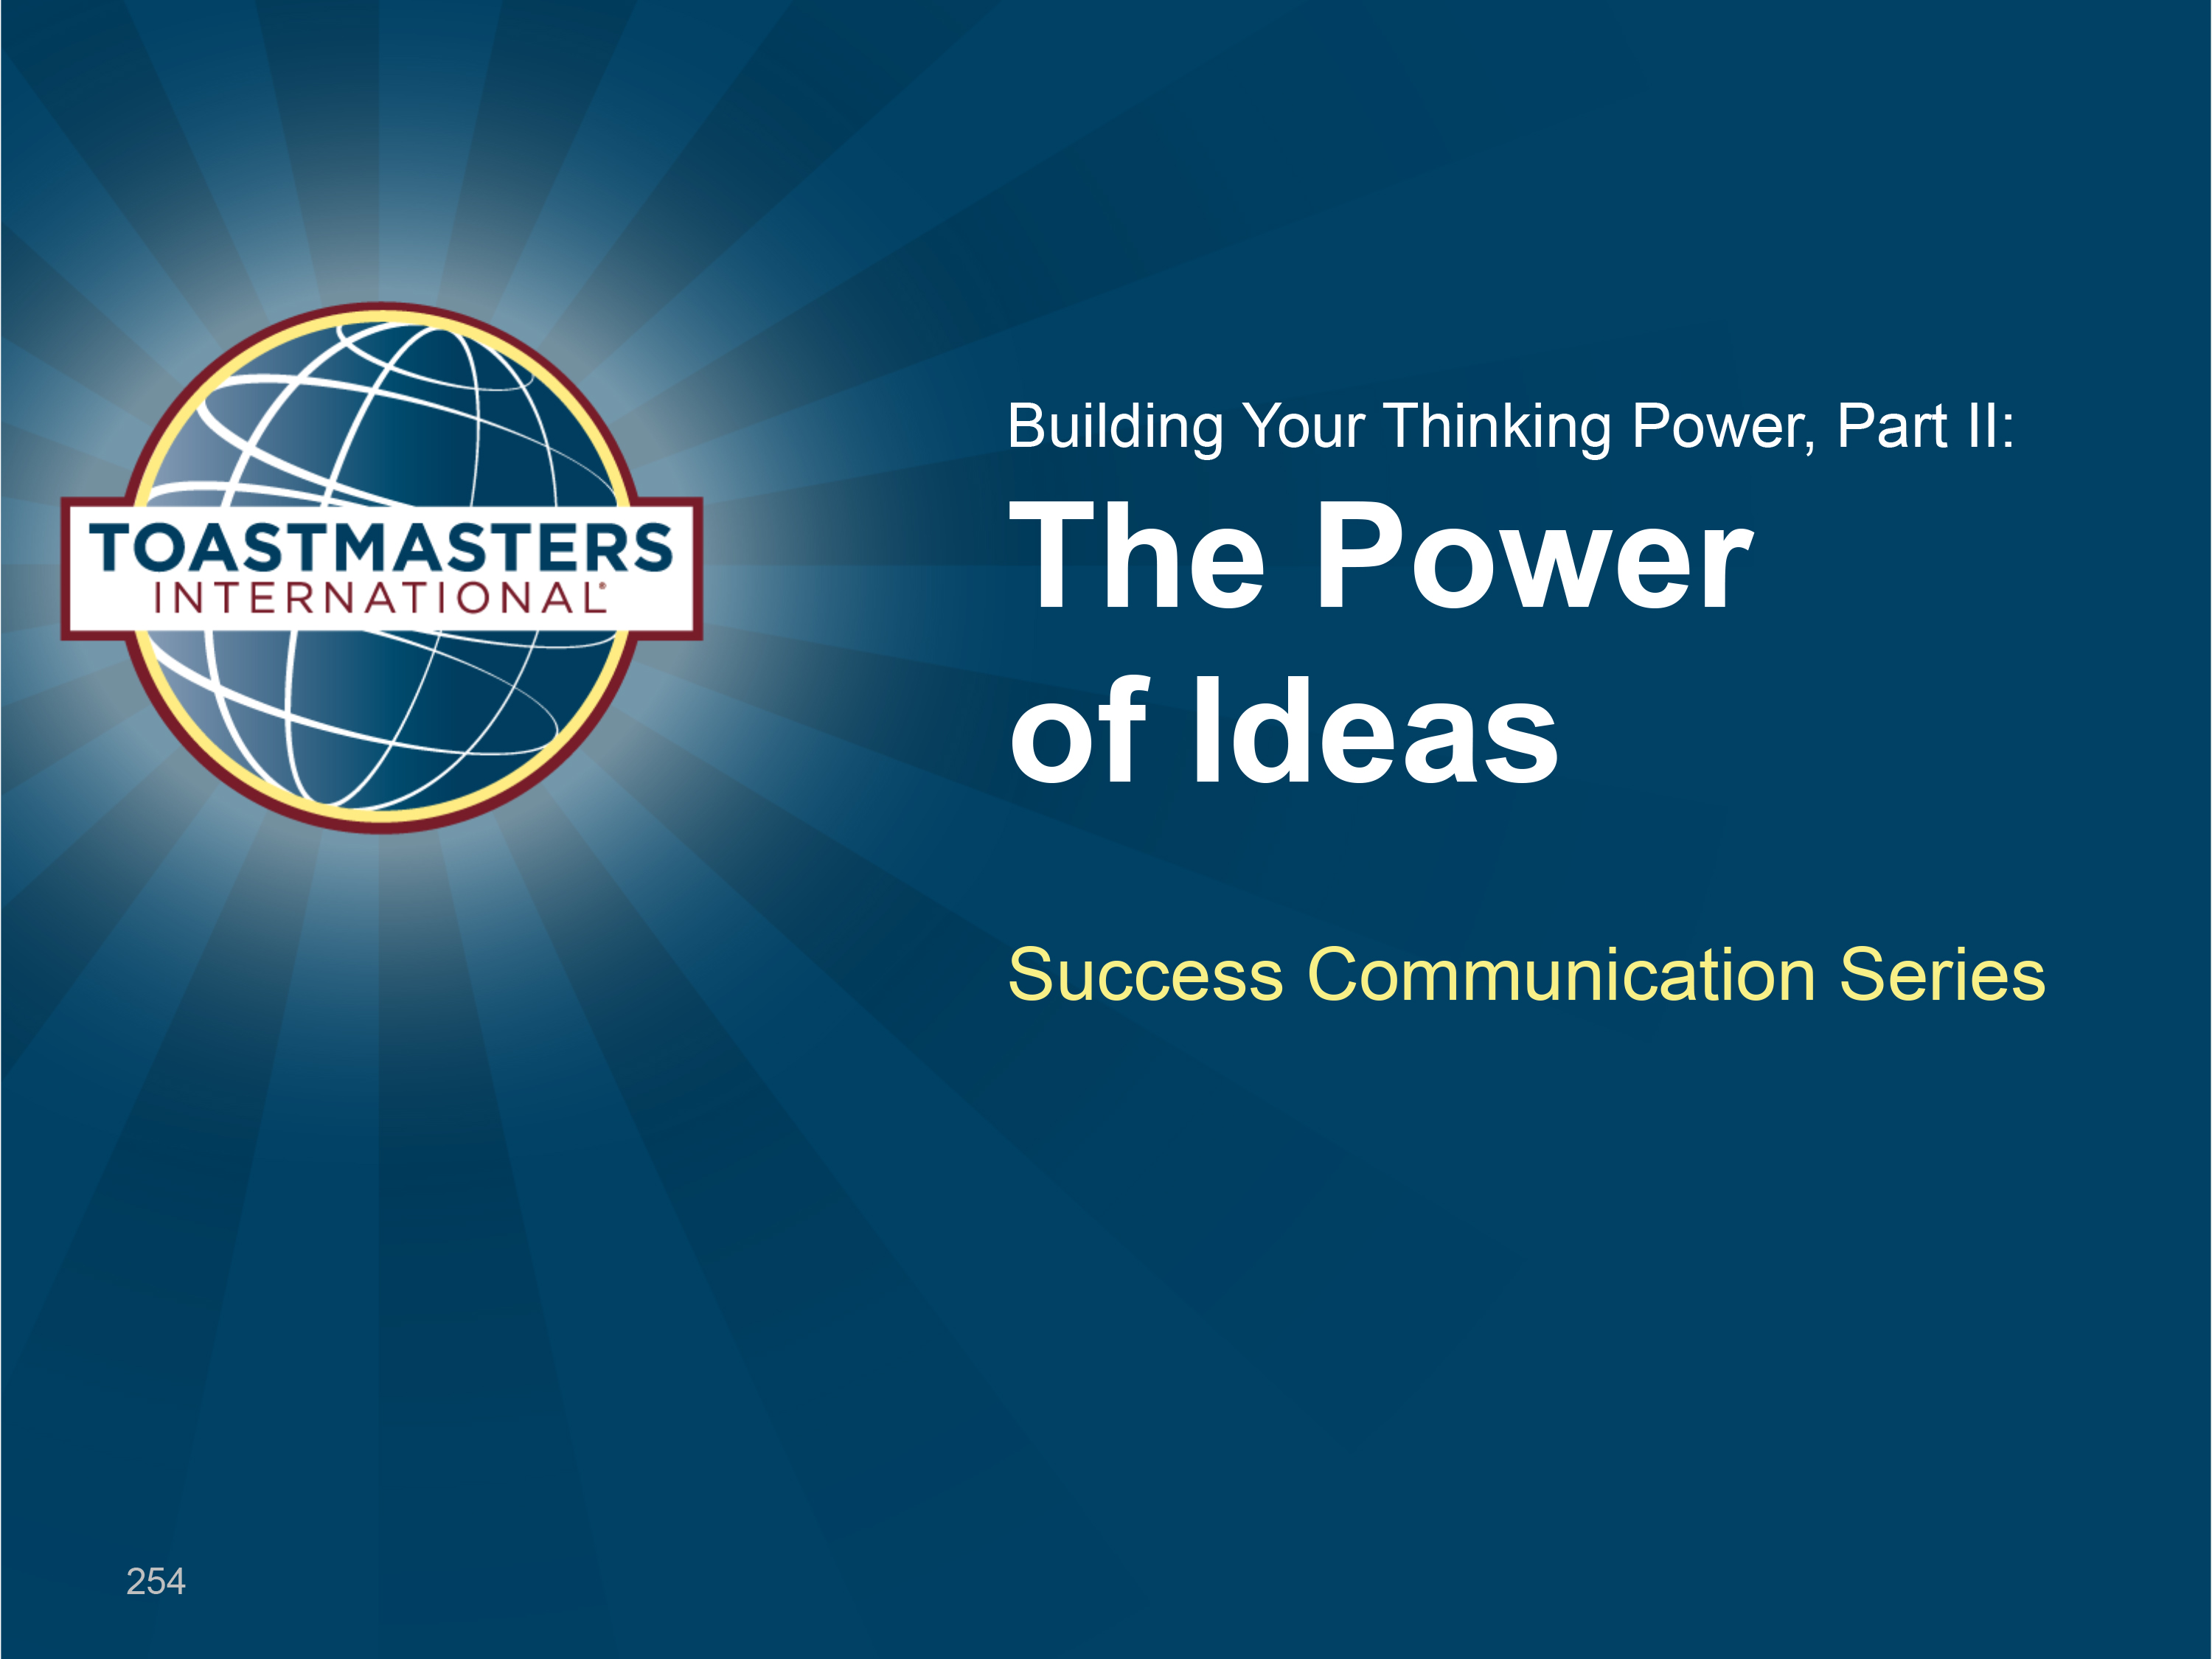 Building Your Thinking Power, II  (PPT)